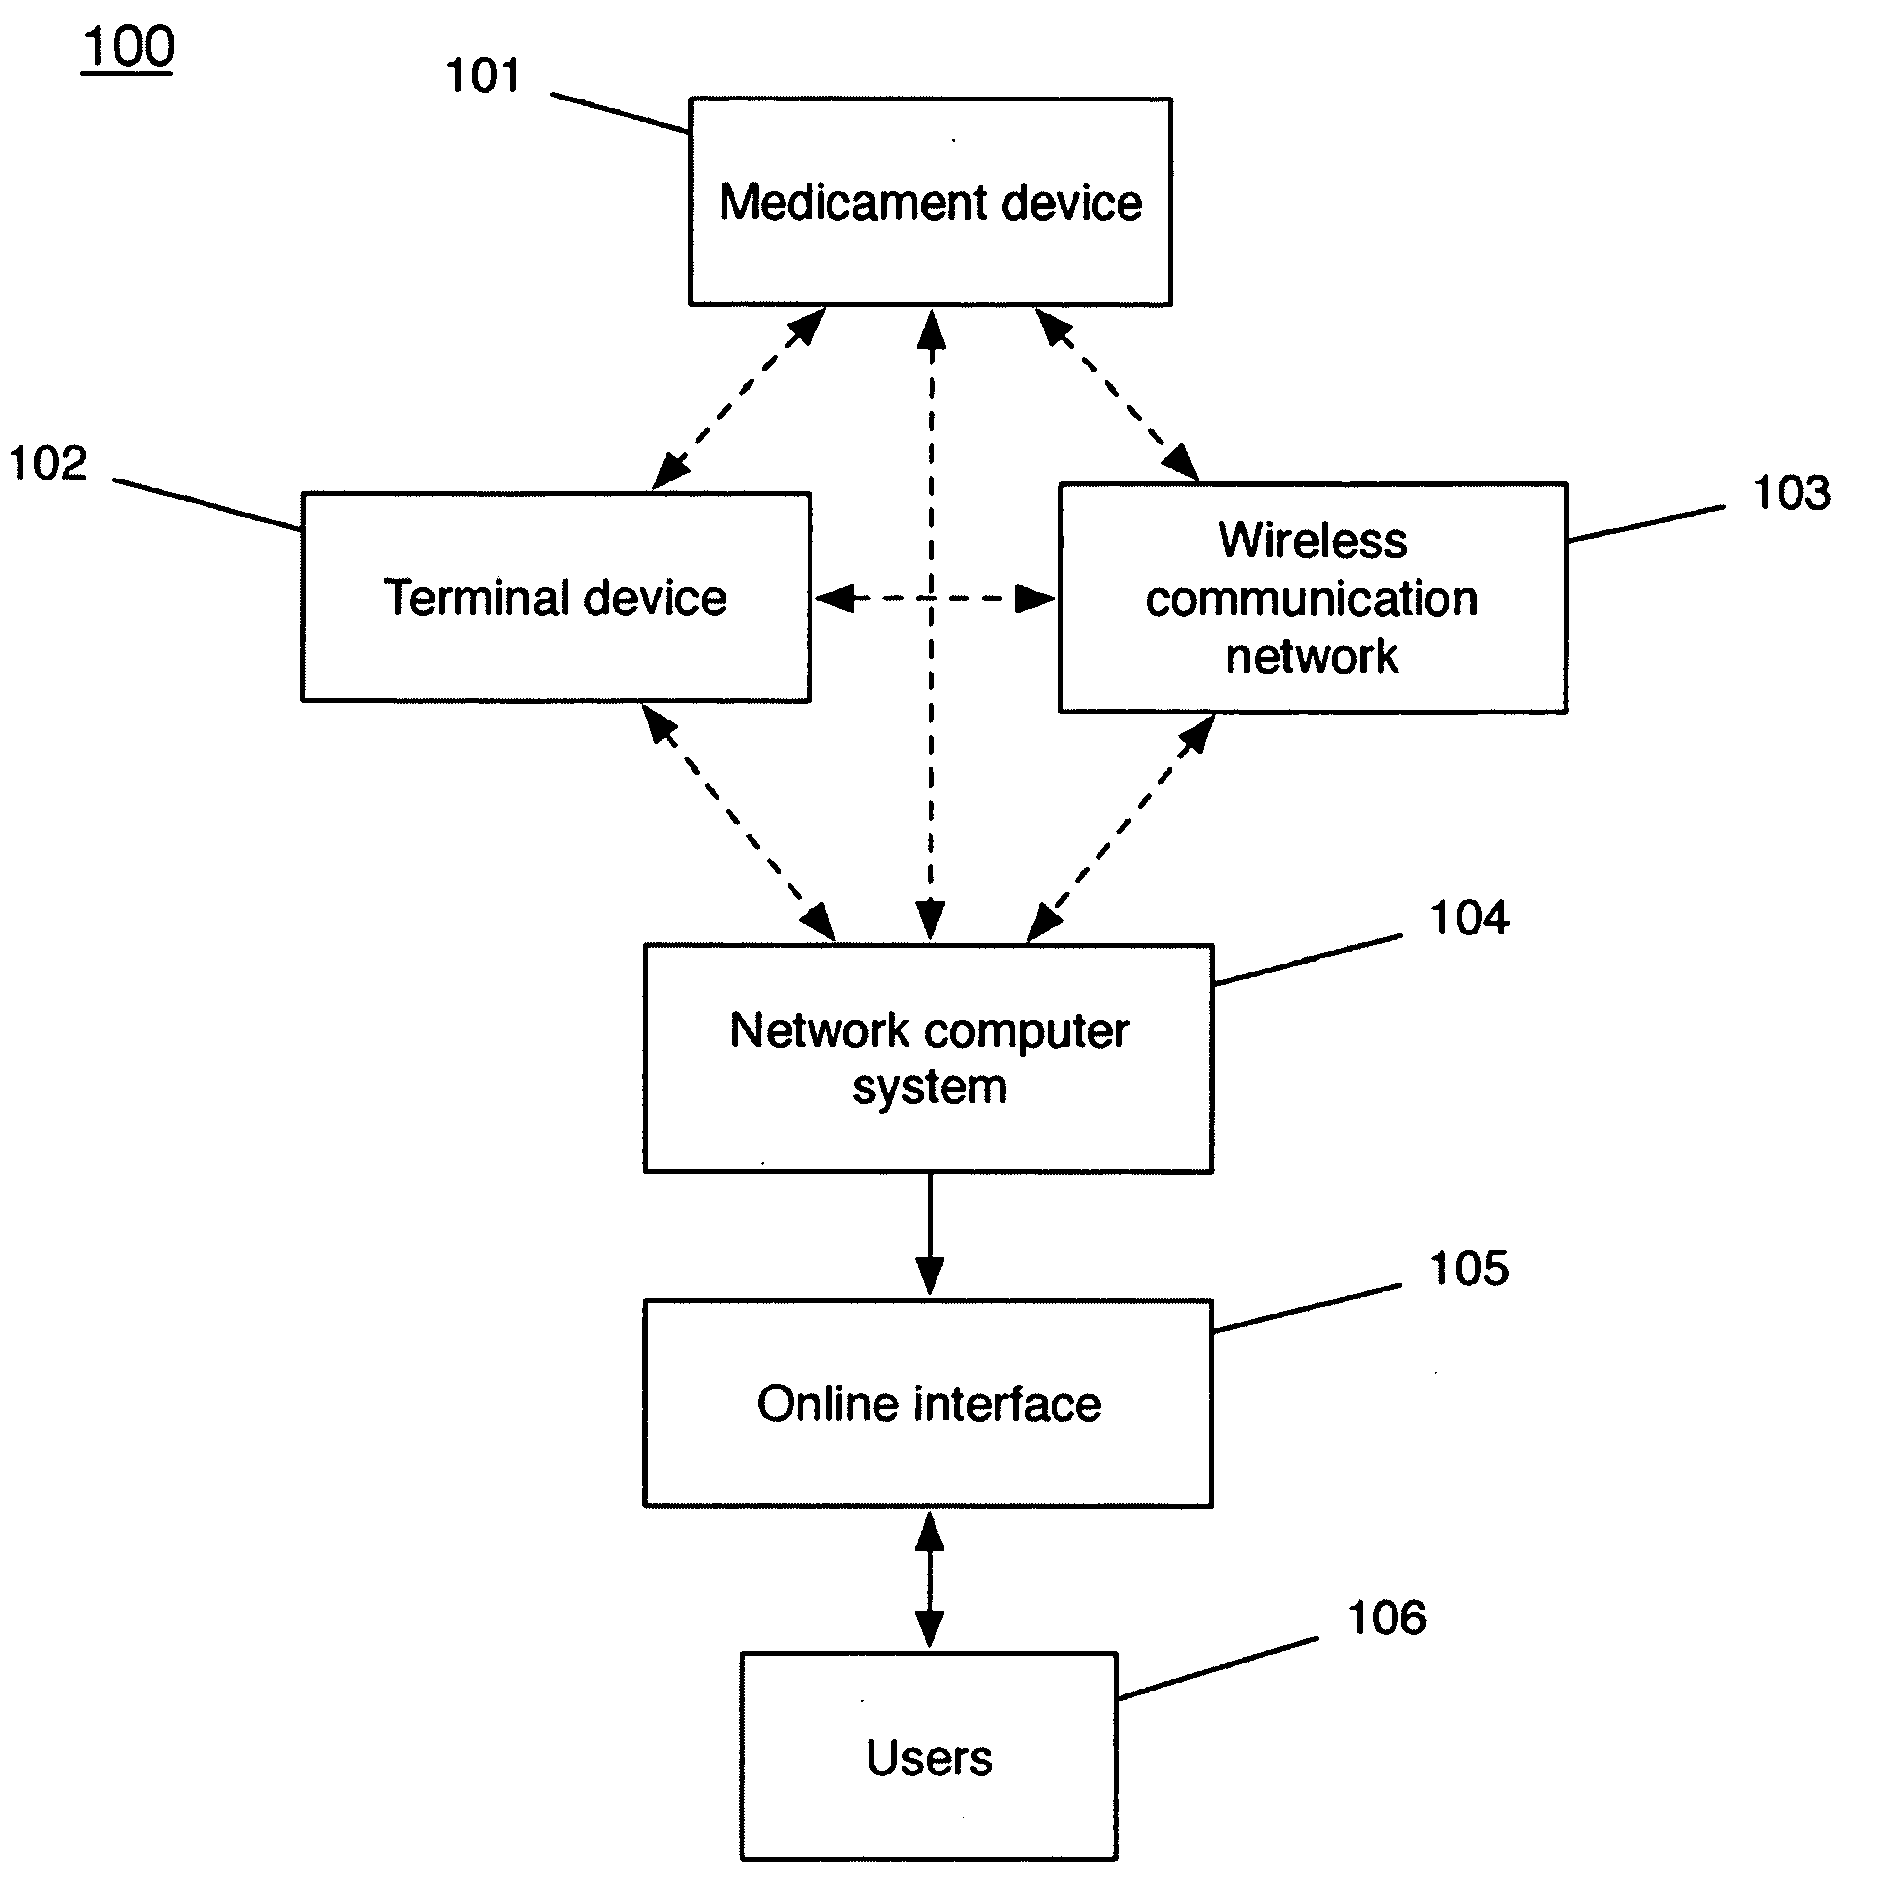 Device and method to monitor, track, map, and analyze usage of metered-dose inhalers in real-time